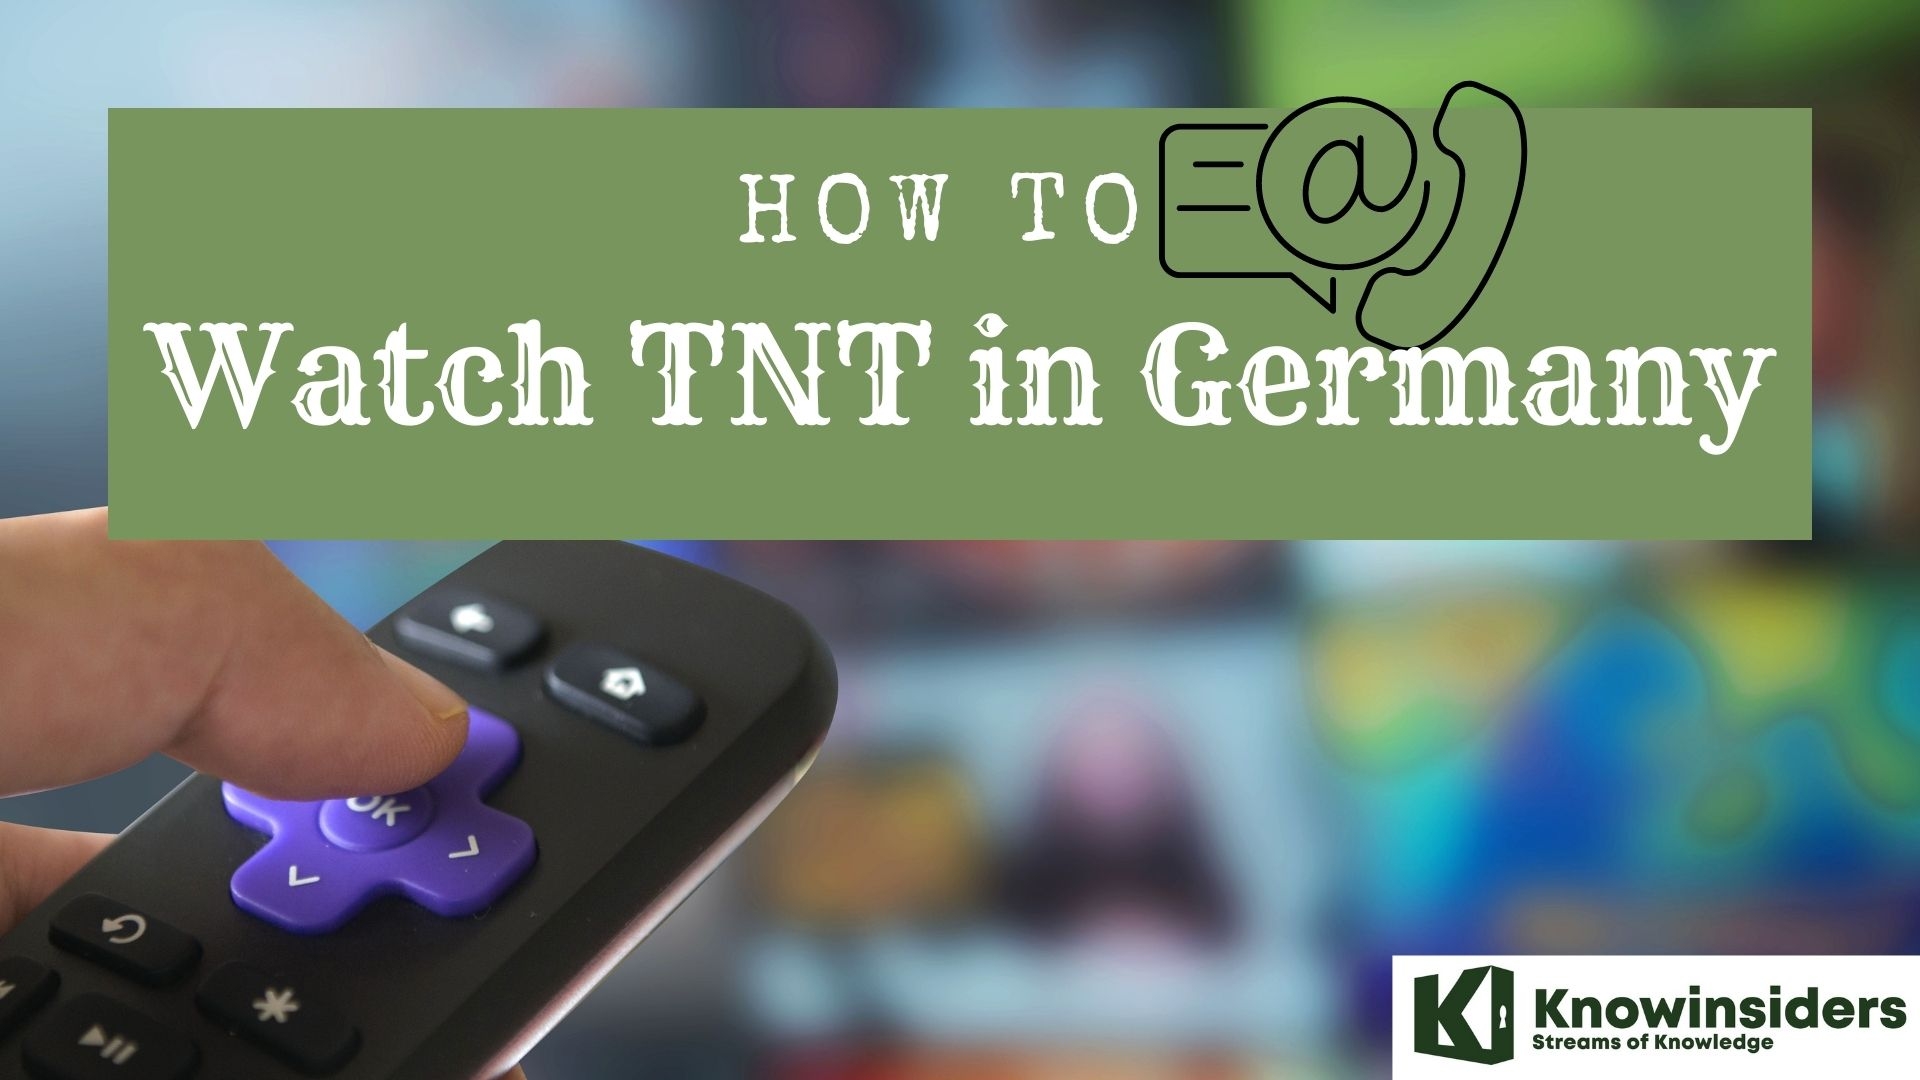 How to Watch TNT in Germany with Cheapest Ways, Without Cable